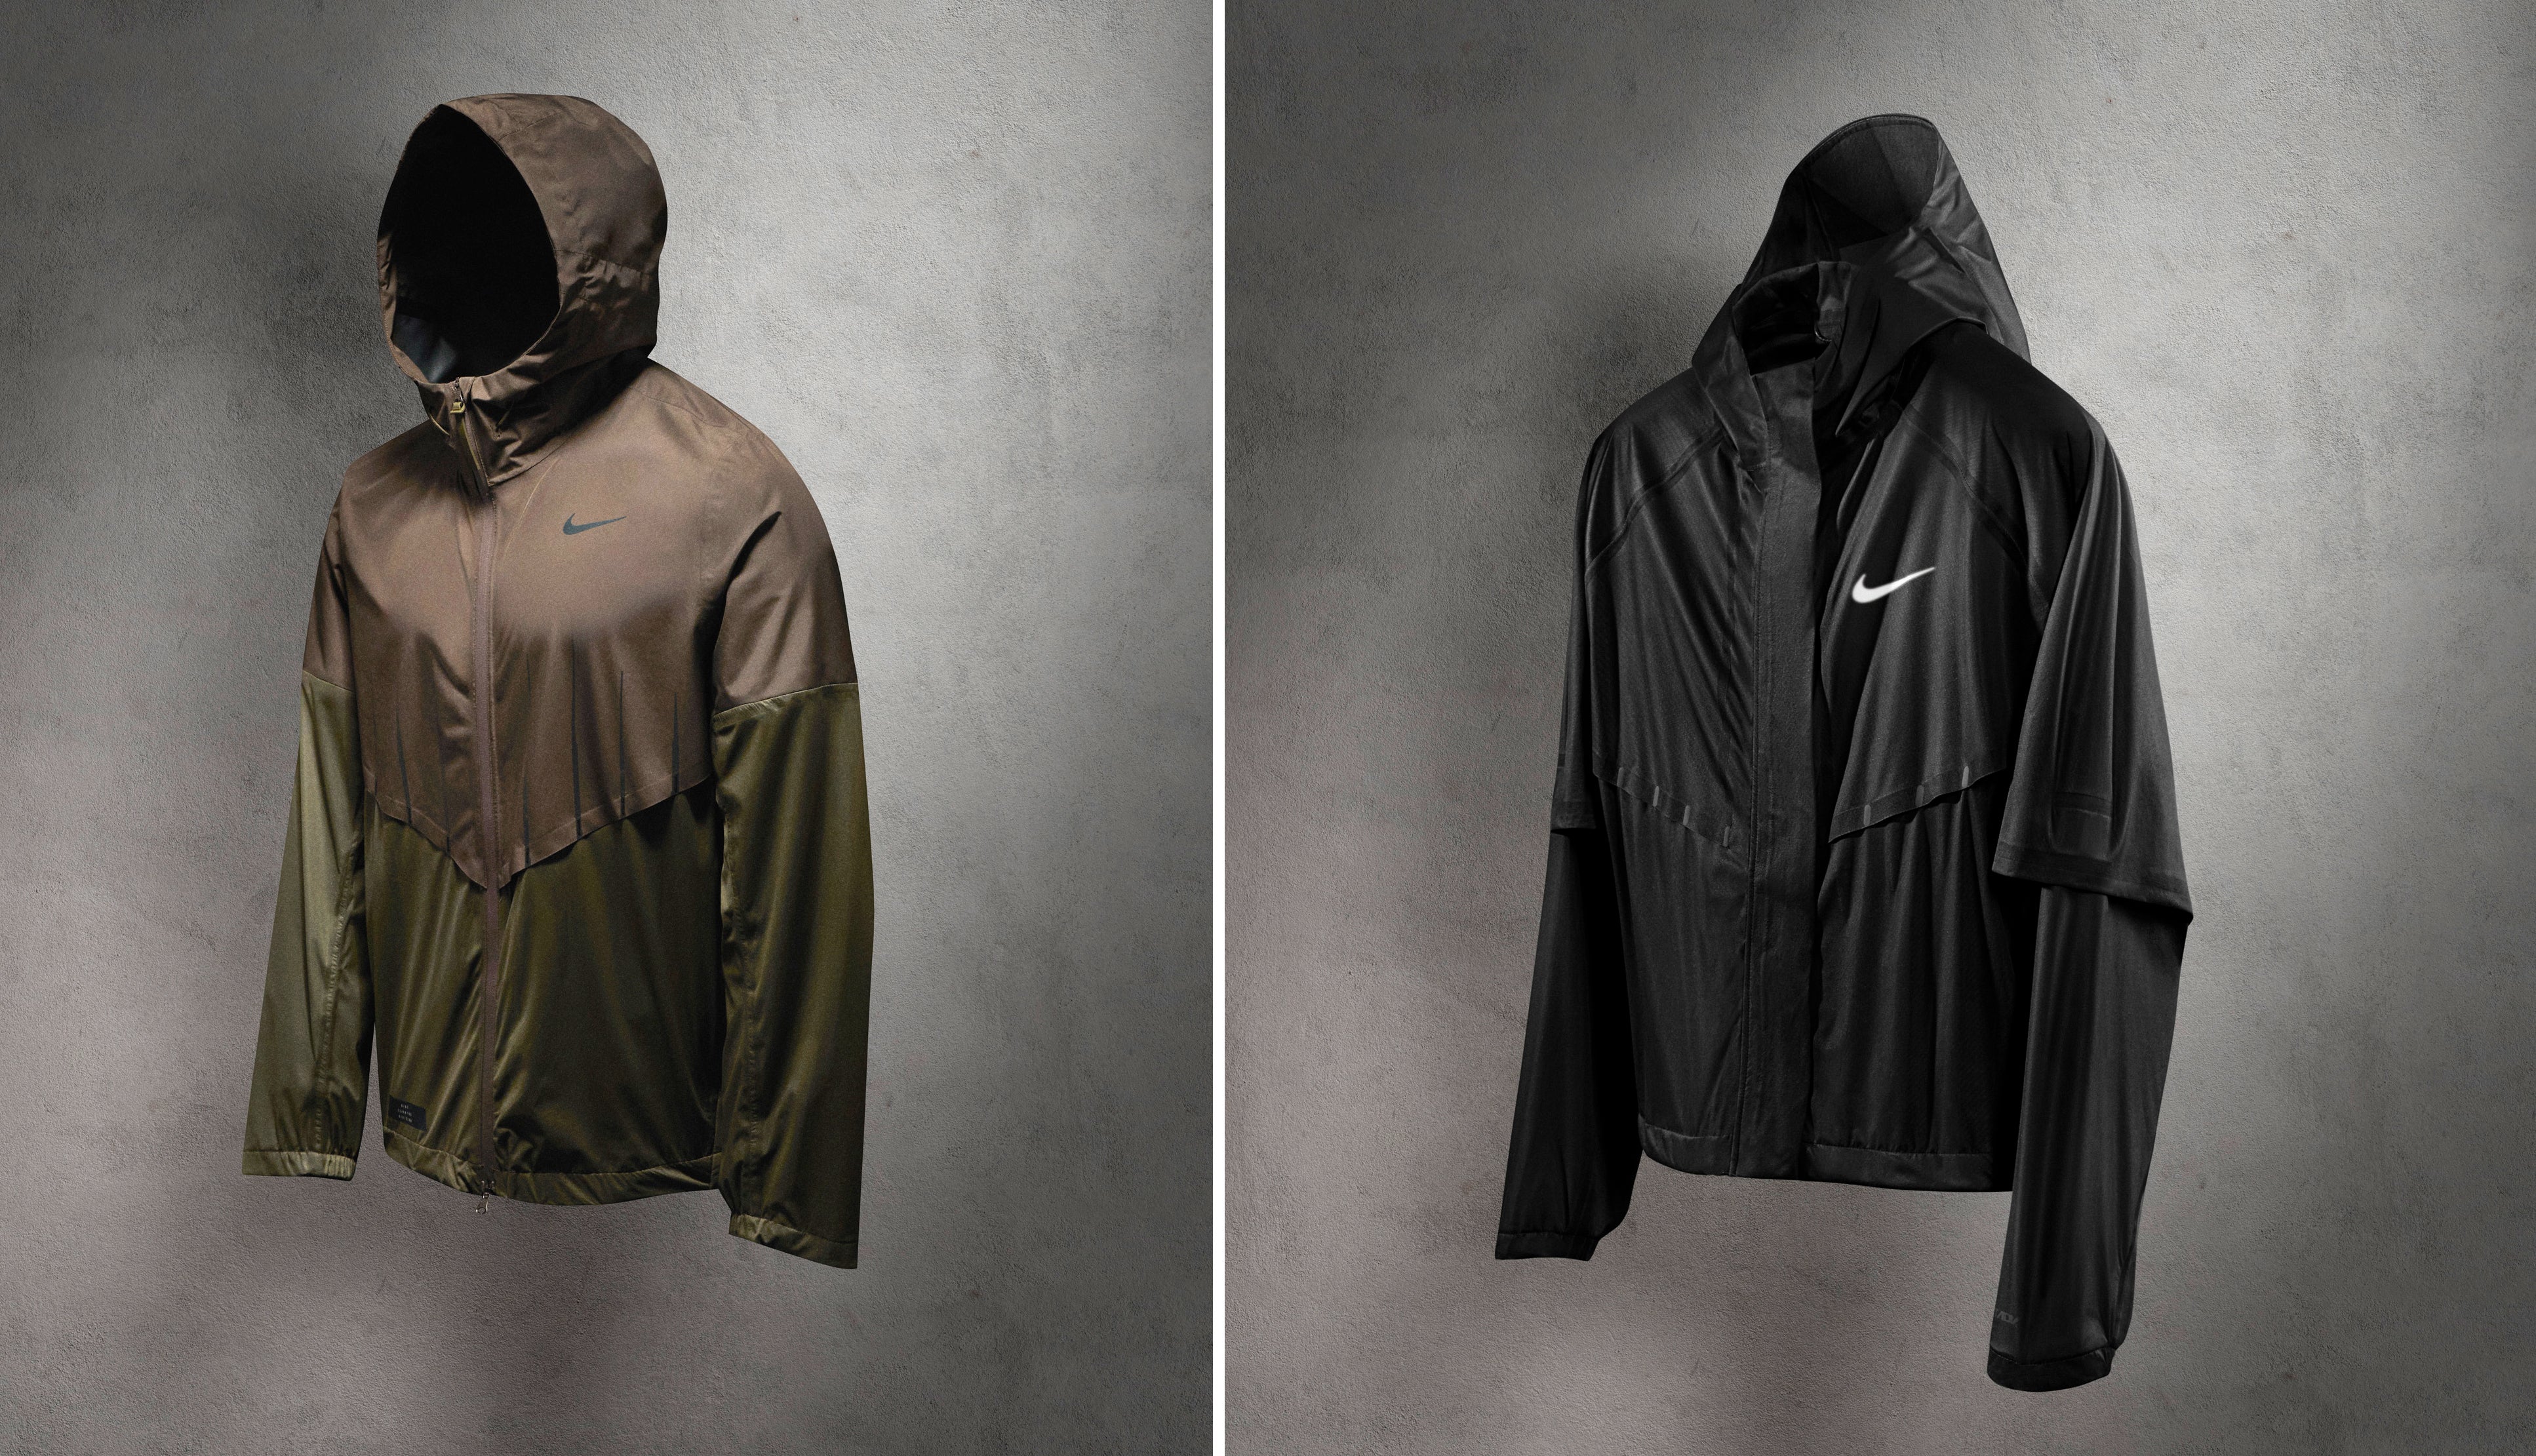 Nike Run Division Origami Jacket pictured in black and brown/green.